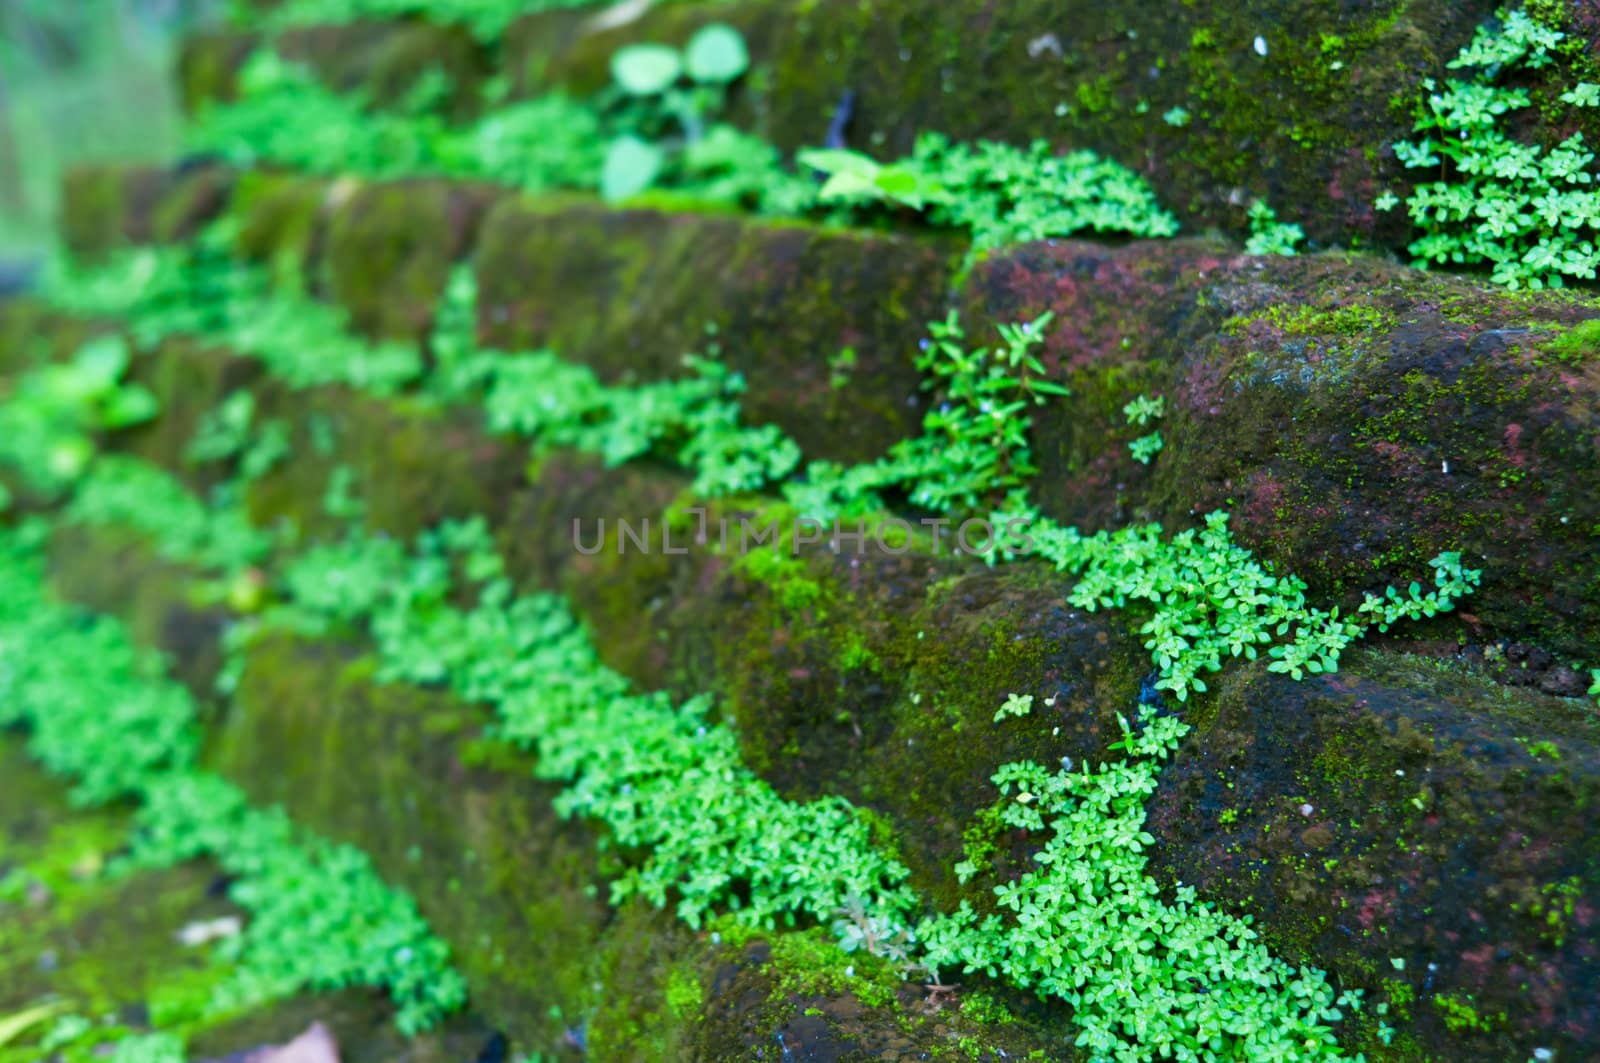 Antient wall covered by moss and grass. Selective focus on right part of the photo.